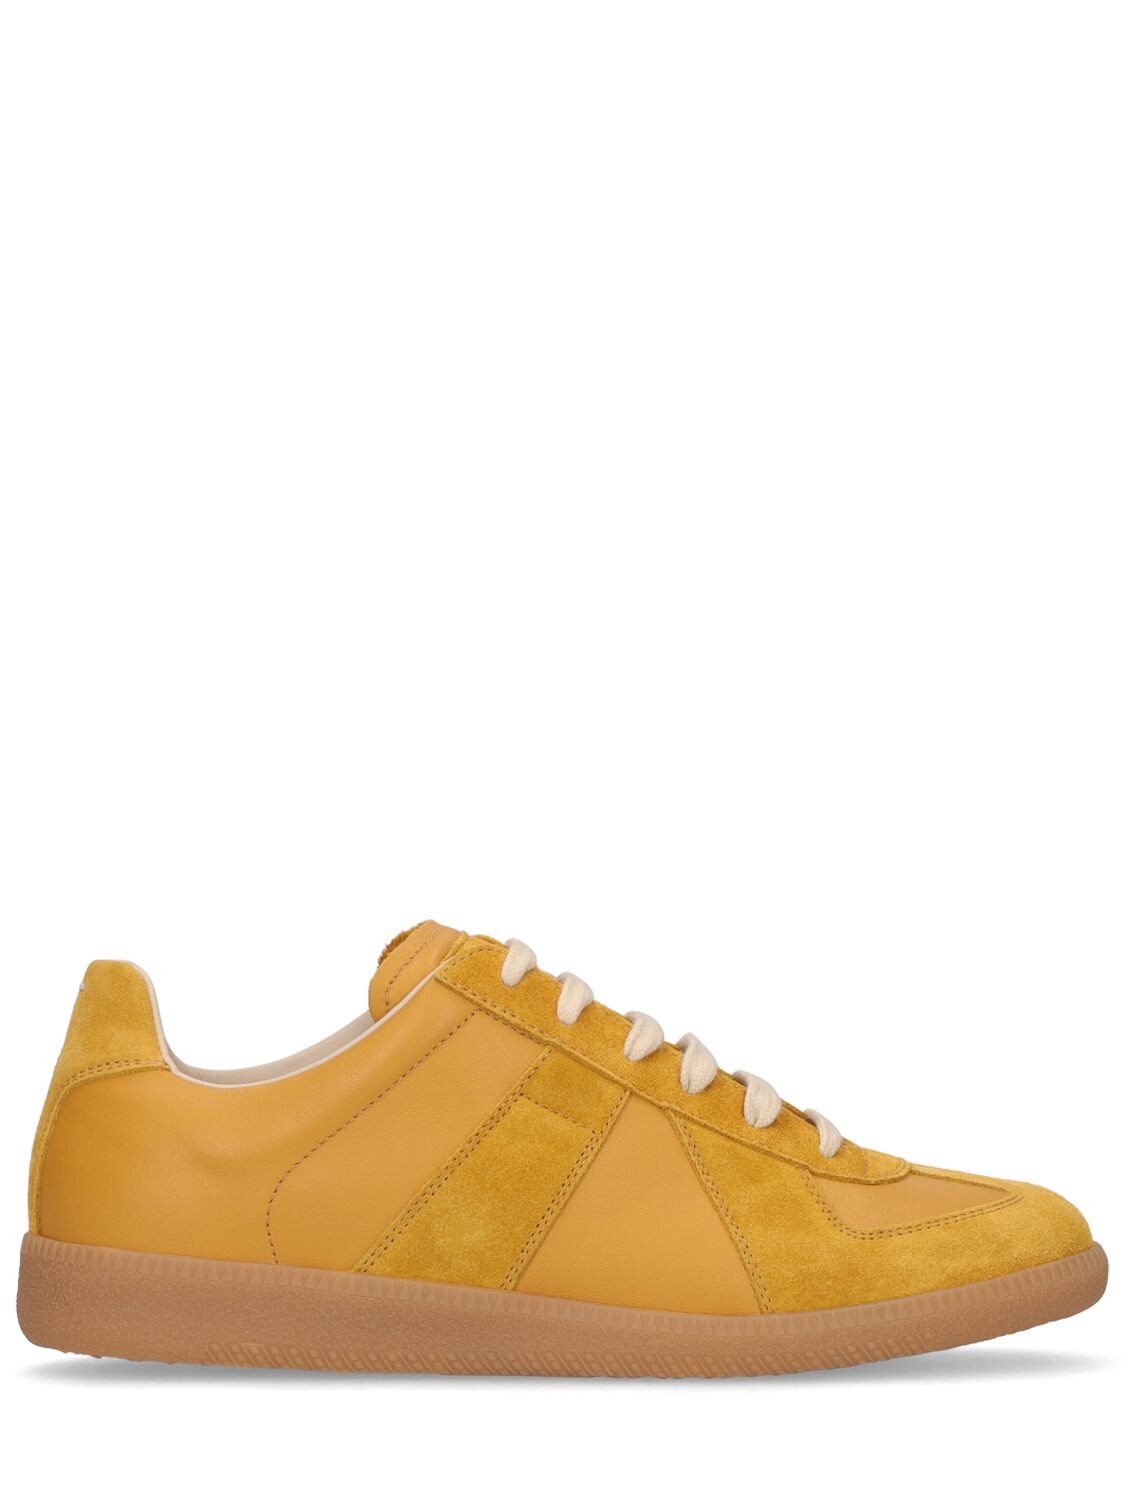 MAISON MARGIELA 20mm Replica Leather & Suede Sneakers